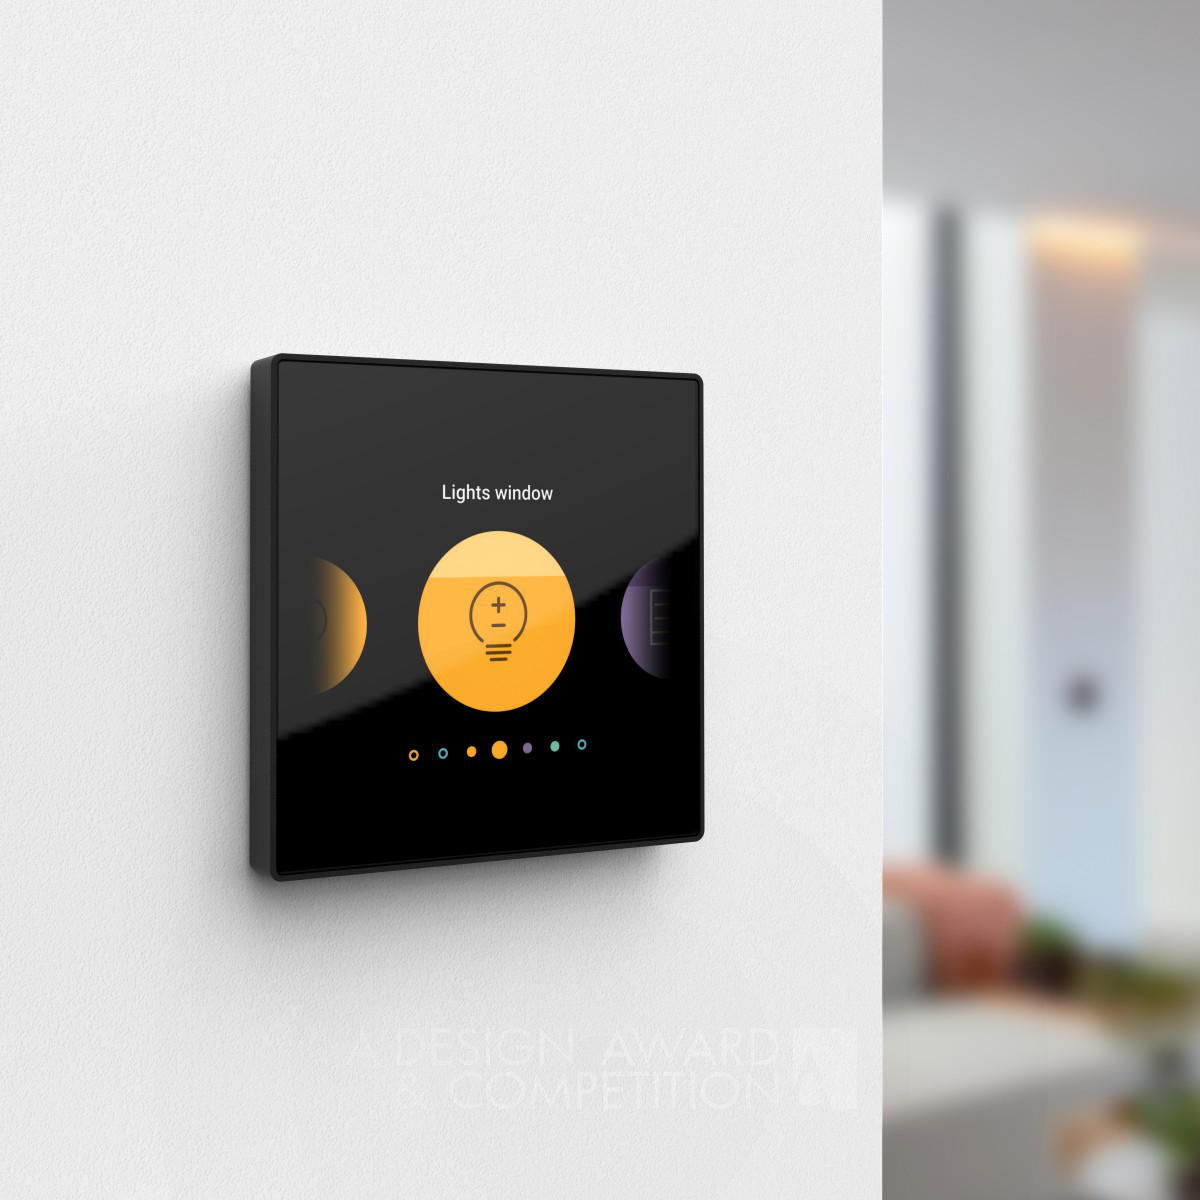 touchswitch Digital Room Control Button by Niko Design Team